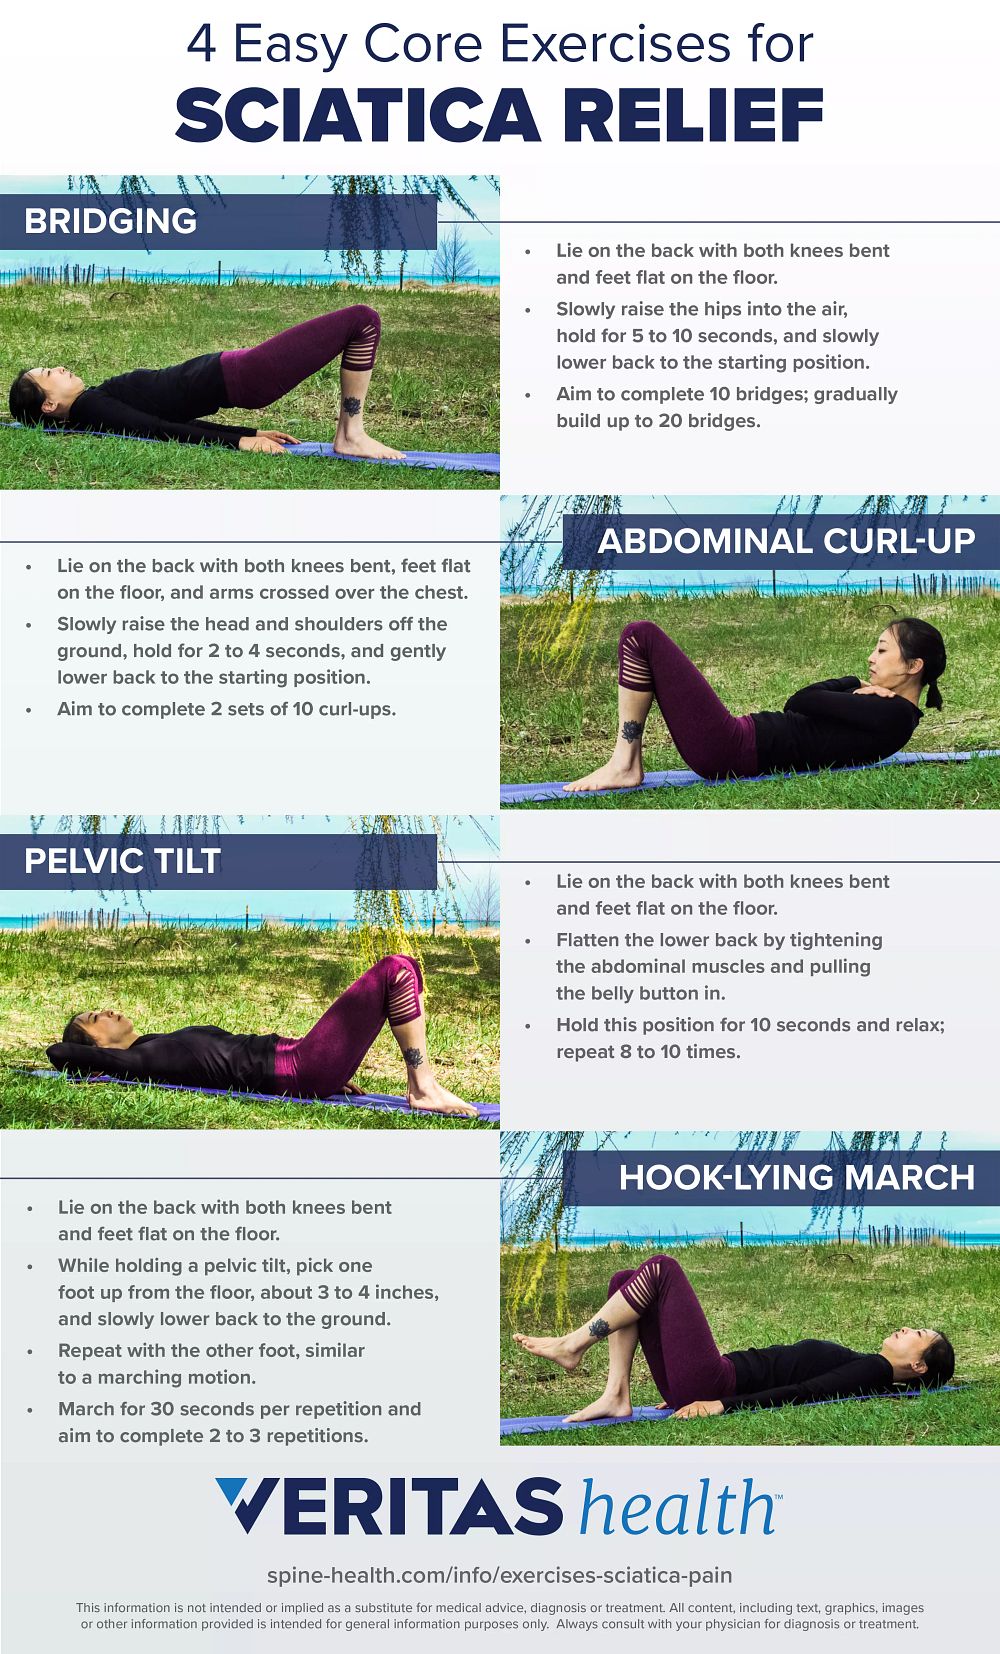 Ananda Yoga Centre - Yoga poses to help ease sciatic nerve pain The sciatic  nerve starts in the lower back and runs deep through the buttocks and  thighs and along the side